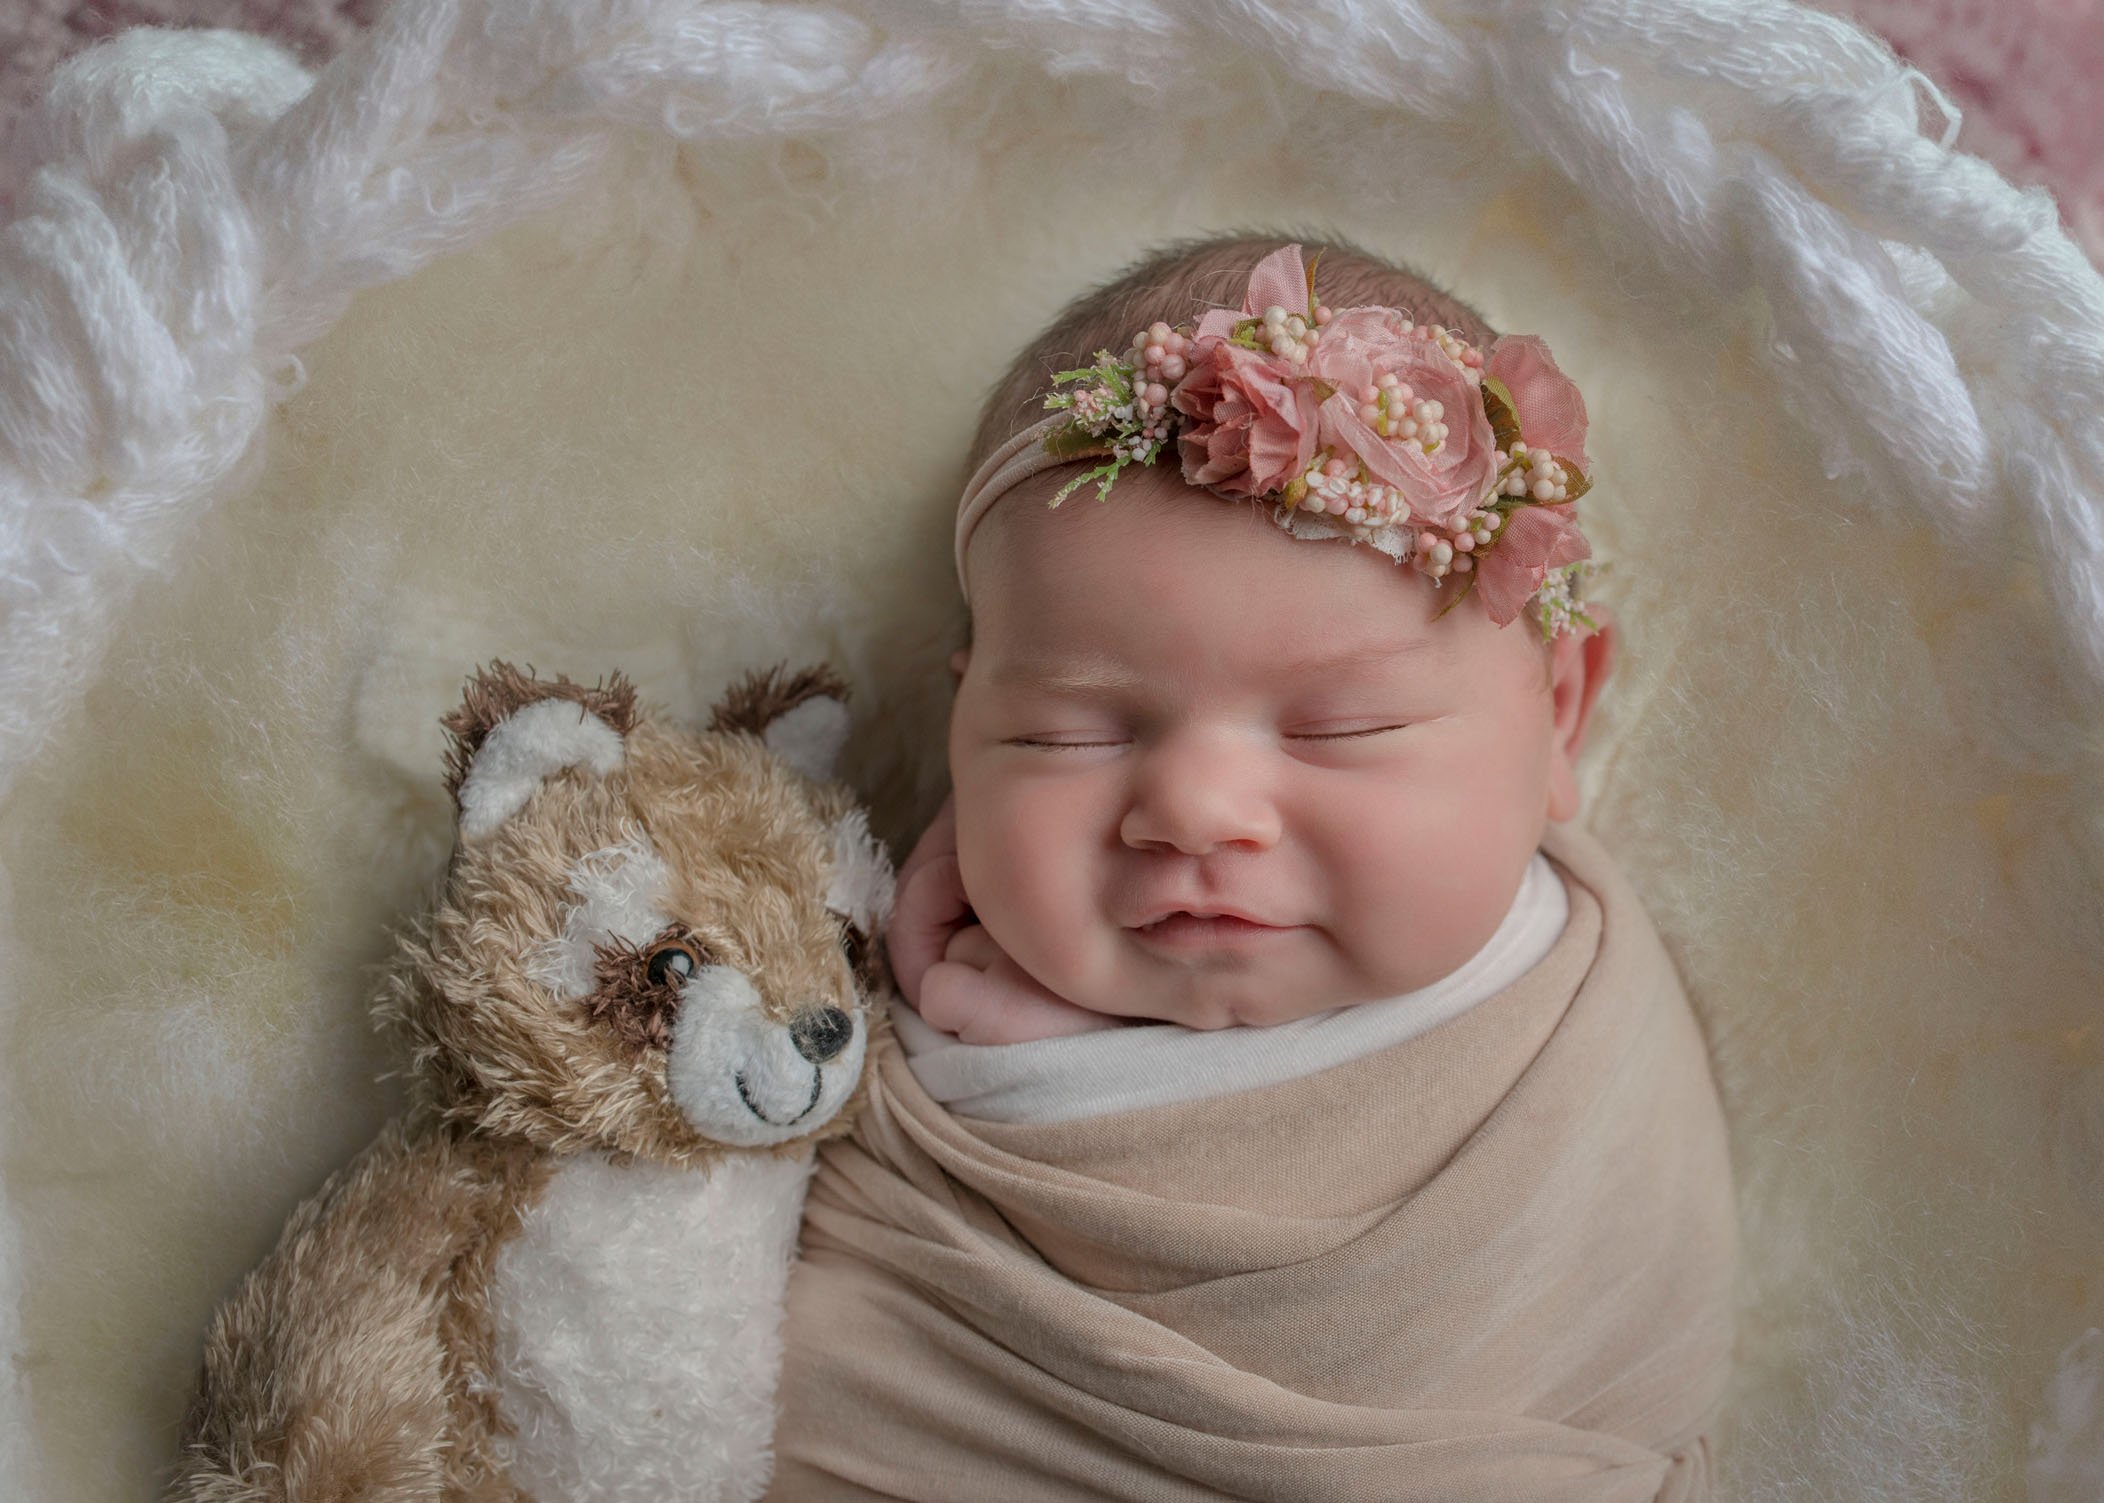 newborn baby girl smiling while sleeping with stuffed toy racoon